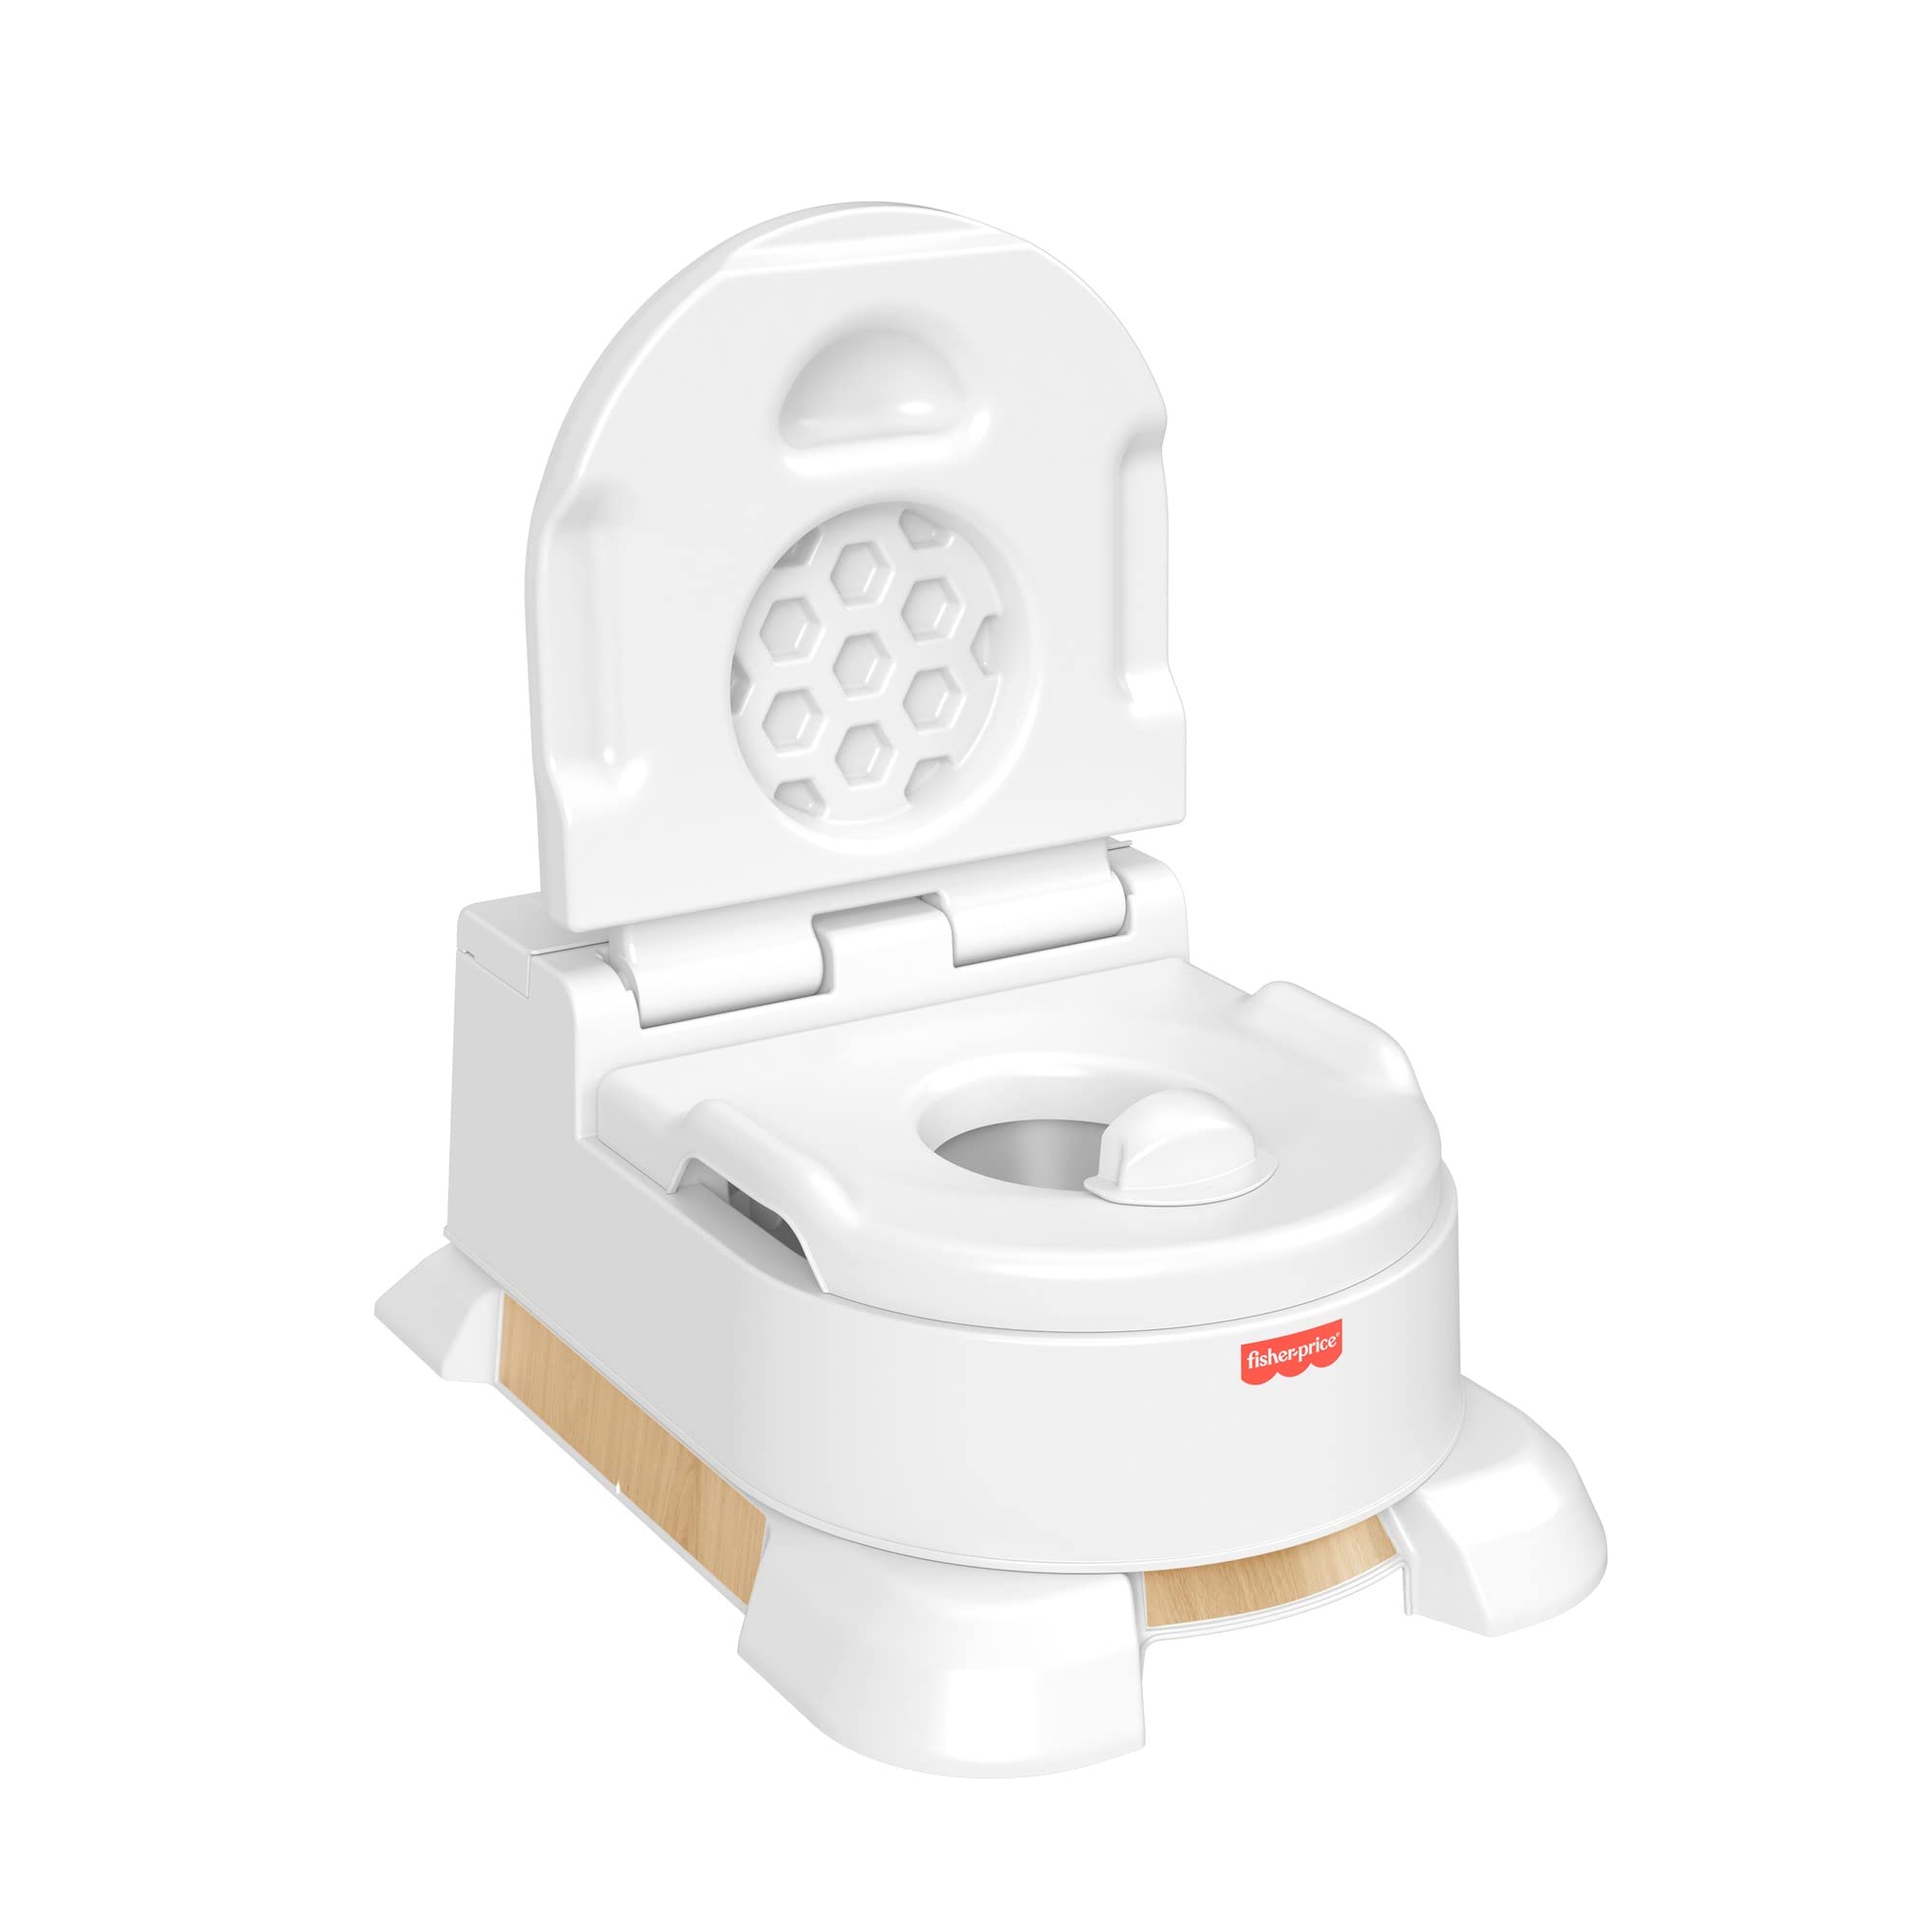 Fisher-Price Home Décor 4-in-1 Potty